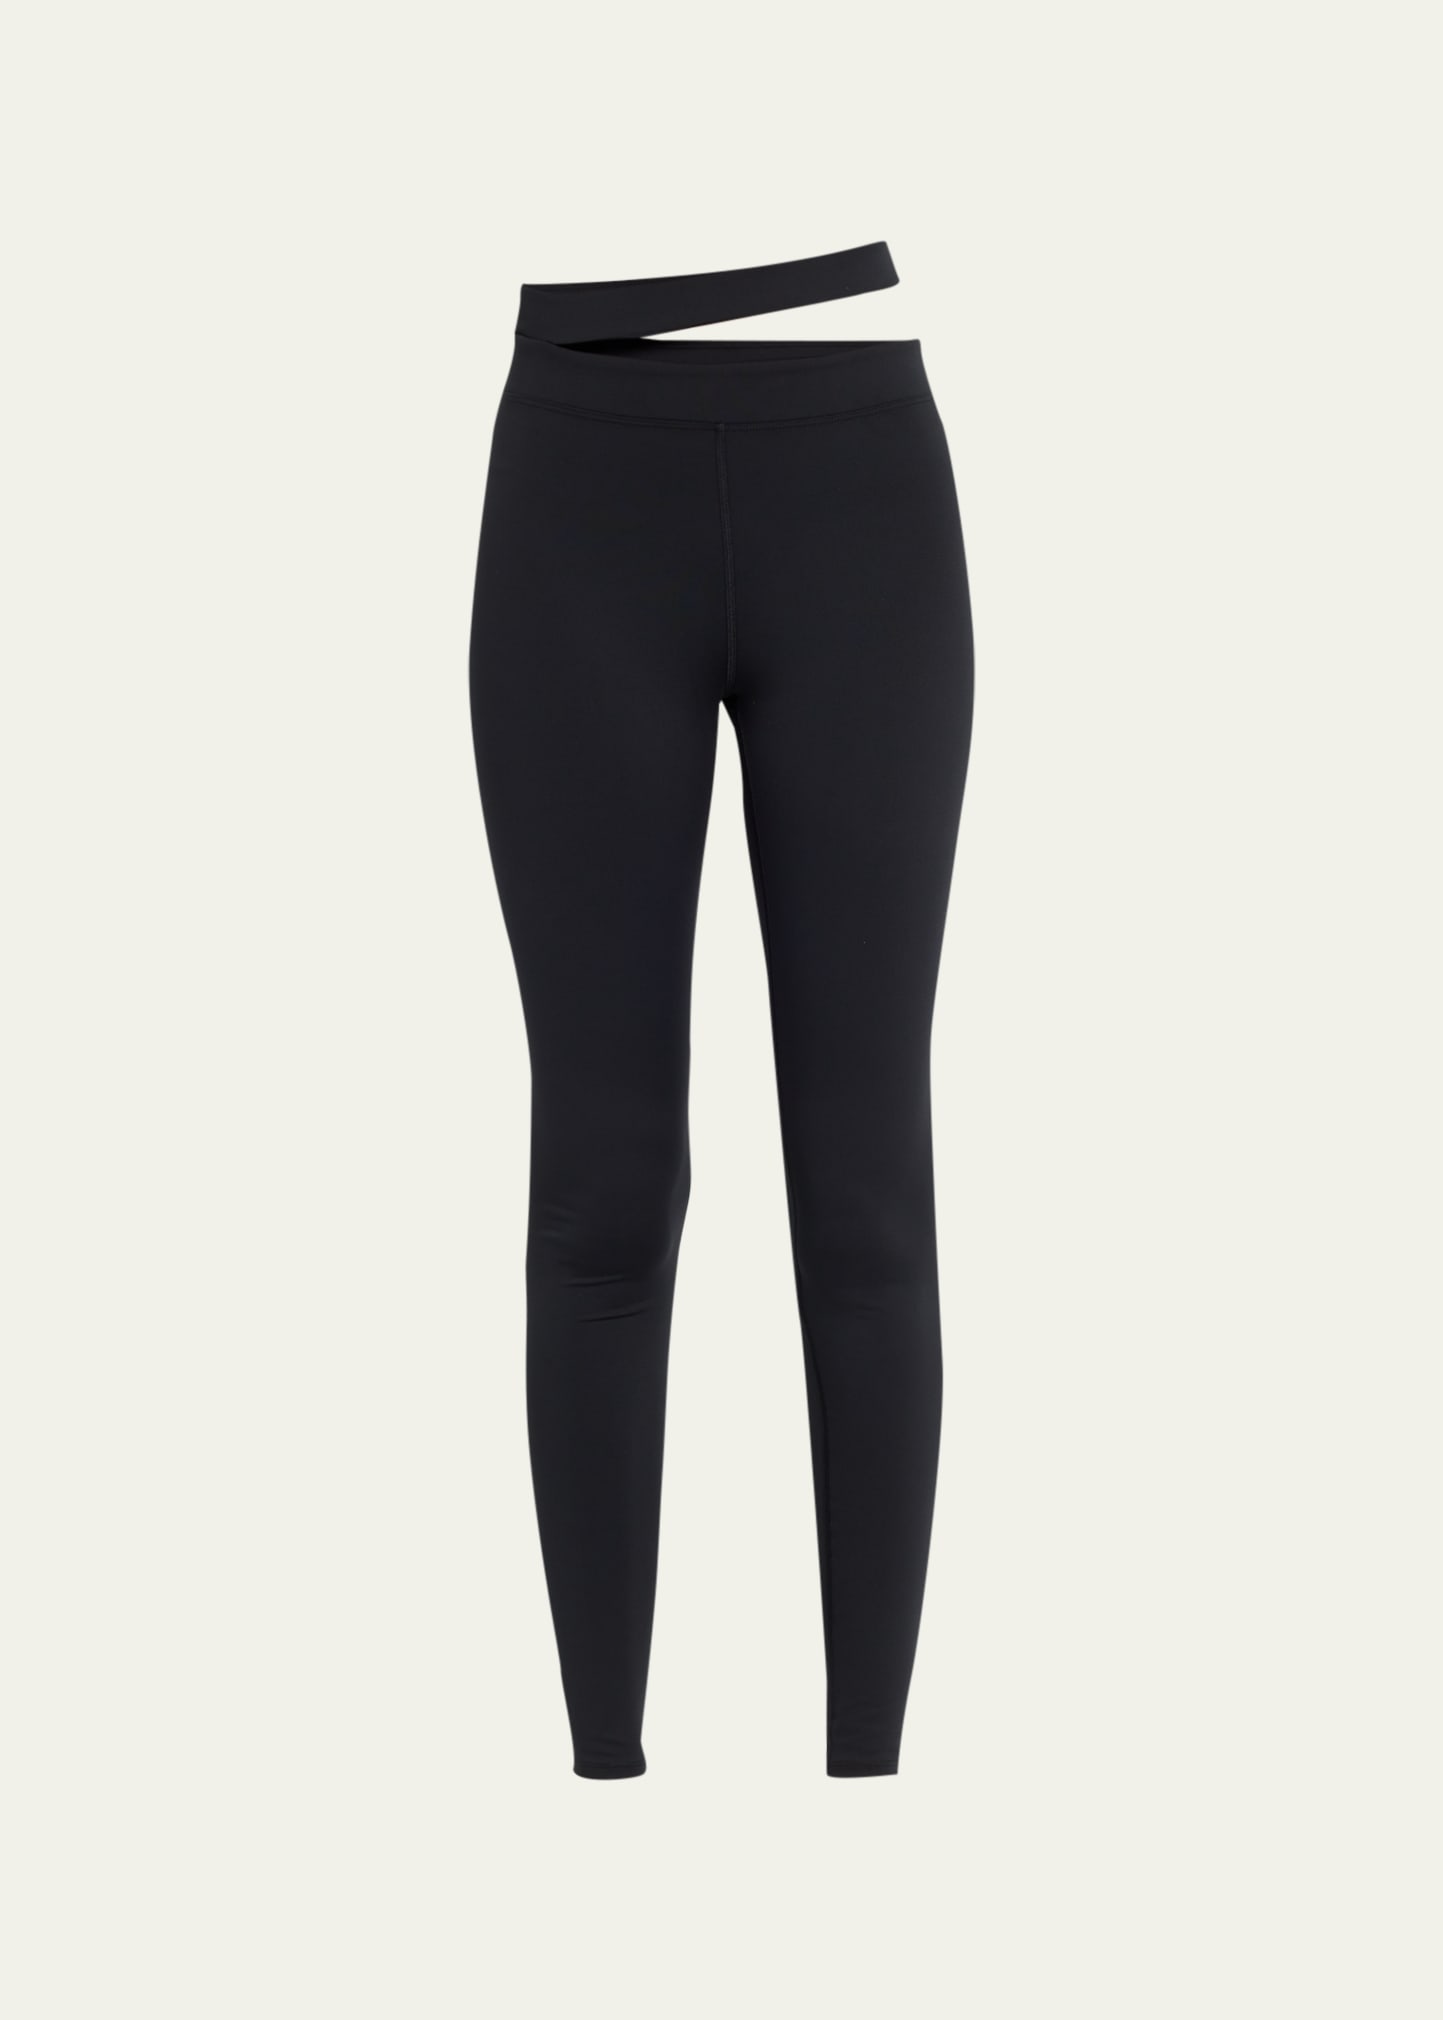 Airlift All Access High-Waisted Leggings